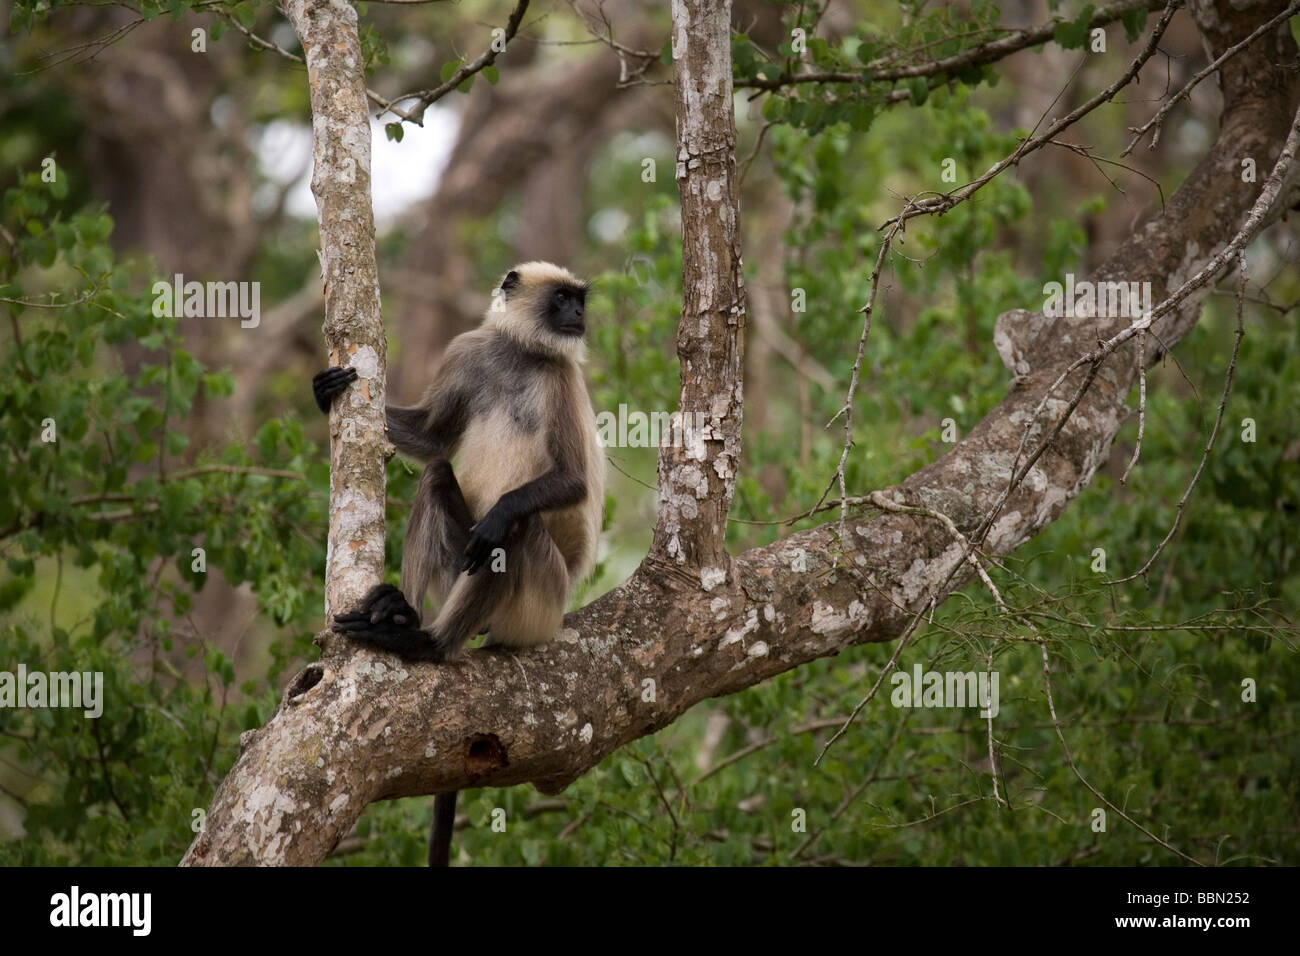 A black faced langur (Presbytis entellus) sits in a tree in the Nagarhole National Park in Karnataka, India. Stock Photo